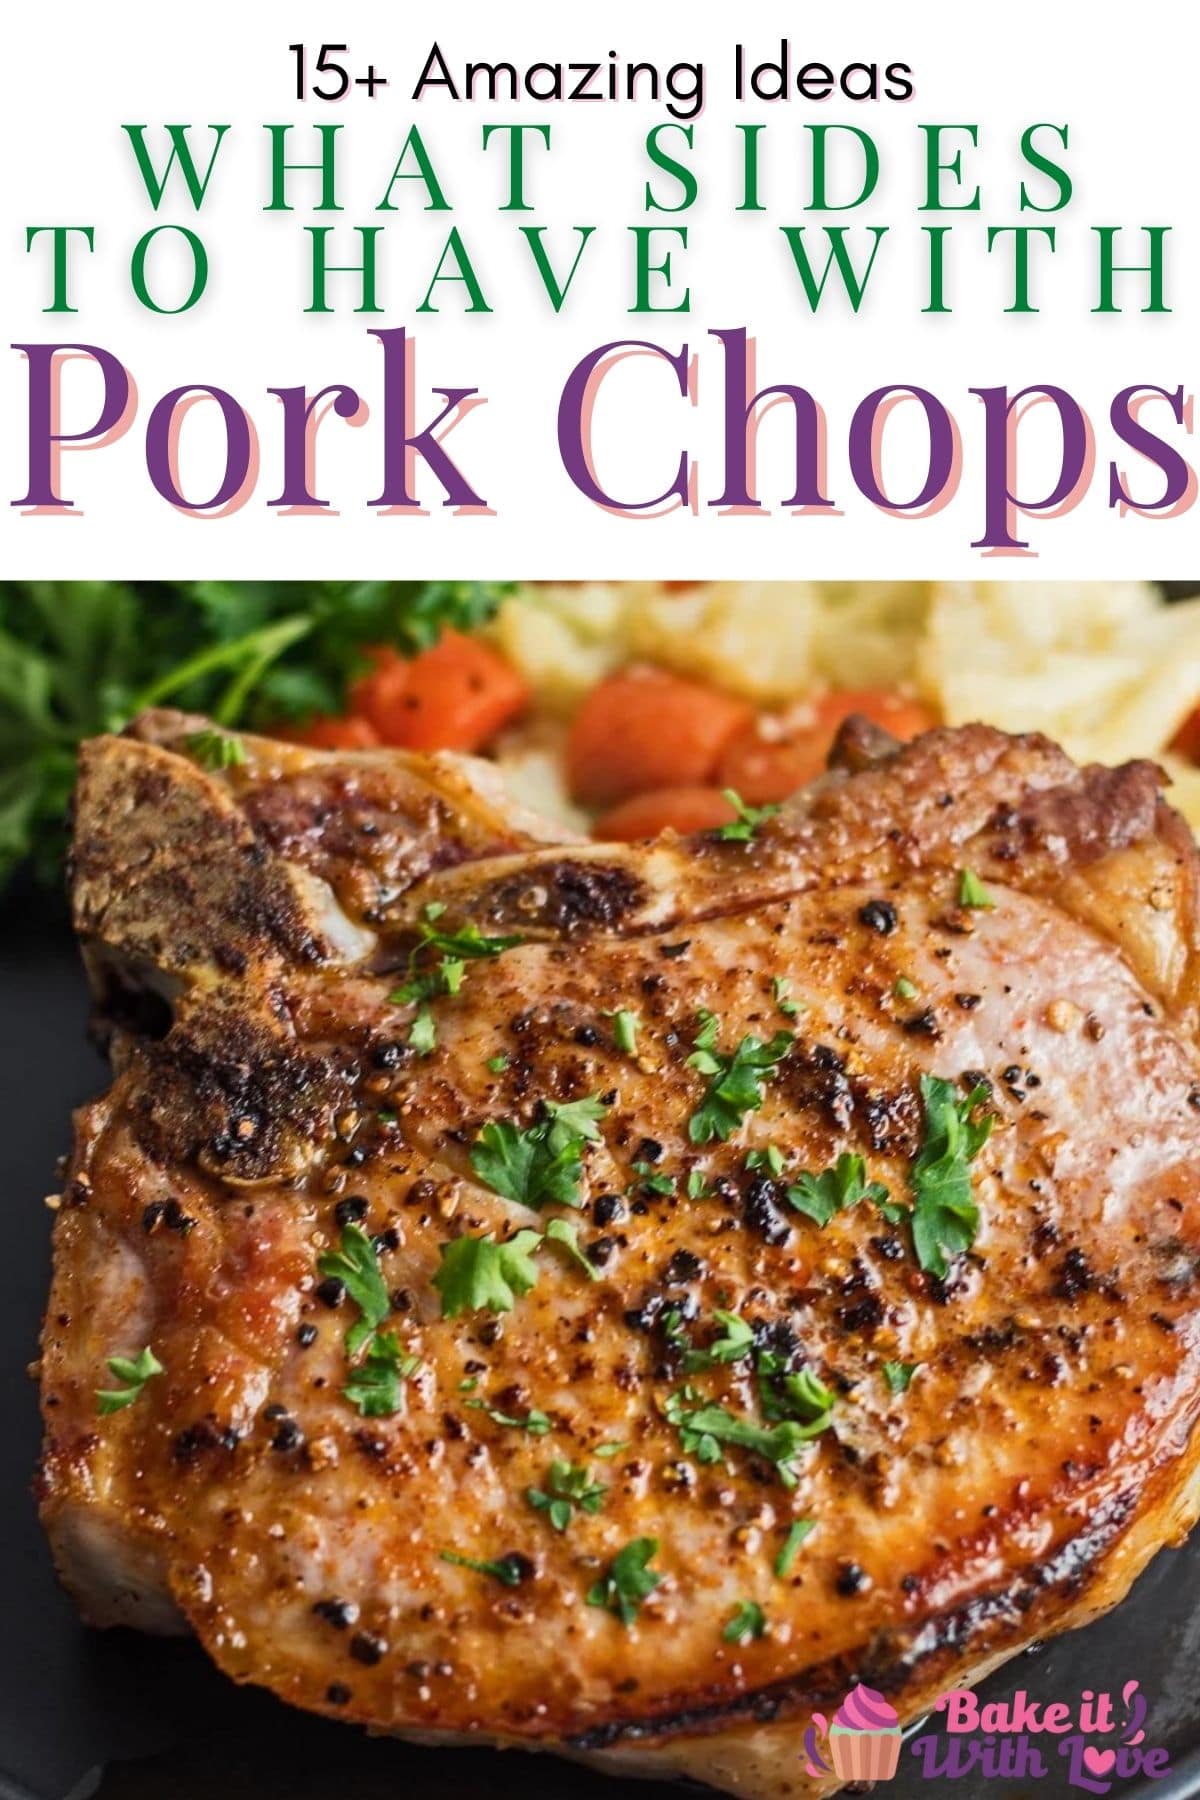 What To Serve With Pork Chops (16+ Amazing Side Dishes To Eat!)